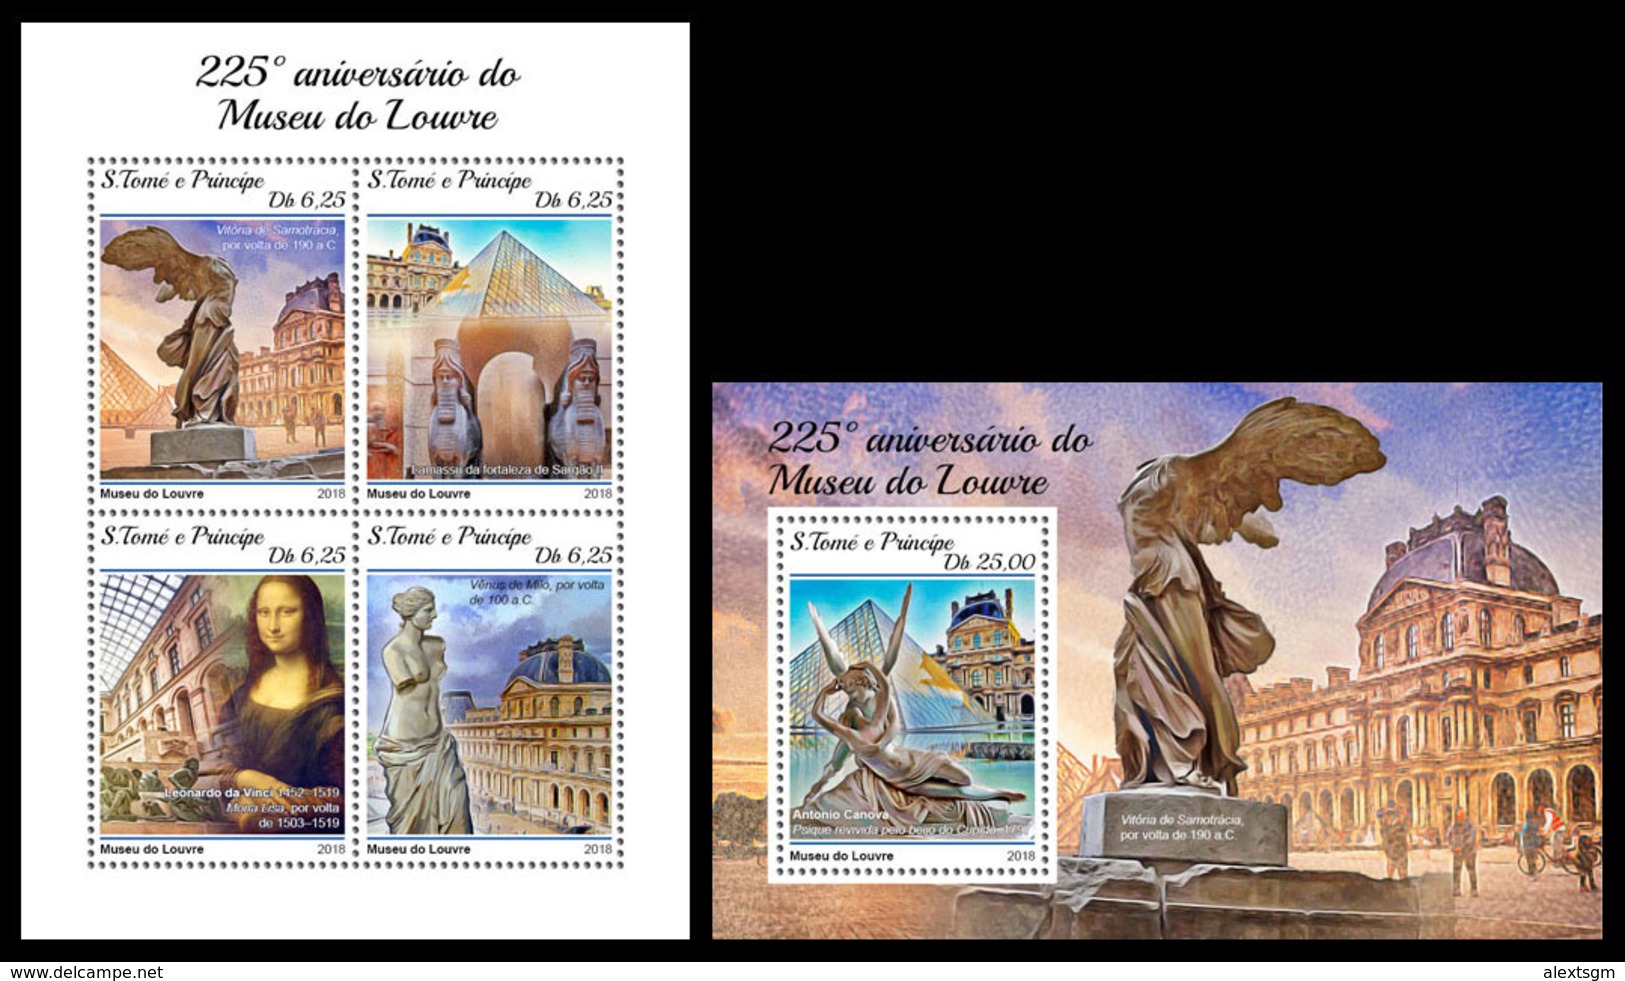 S. TOME & PRINCIPE 2018 - Louvre (Small). M/S + S/S Official Issue - Musei